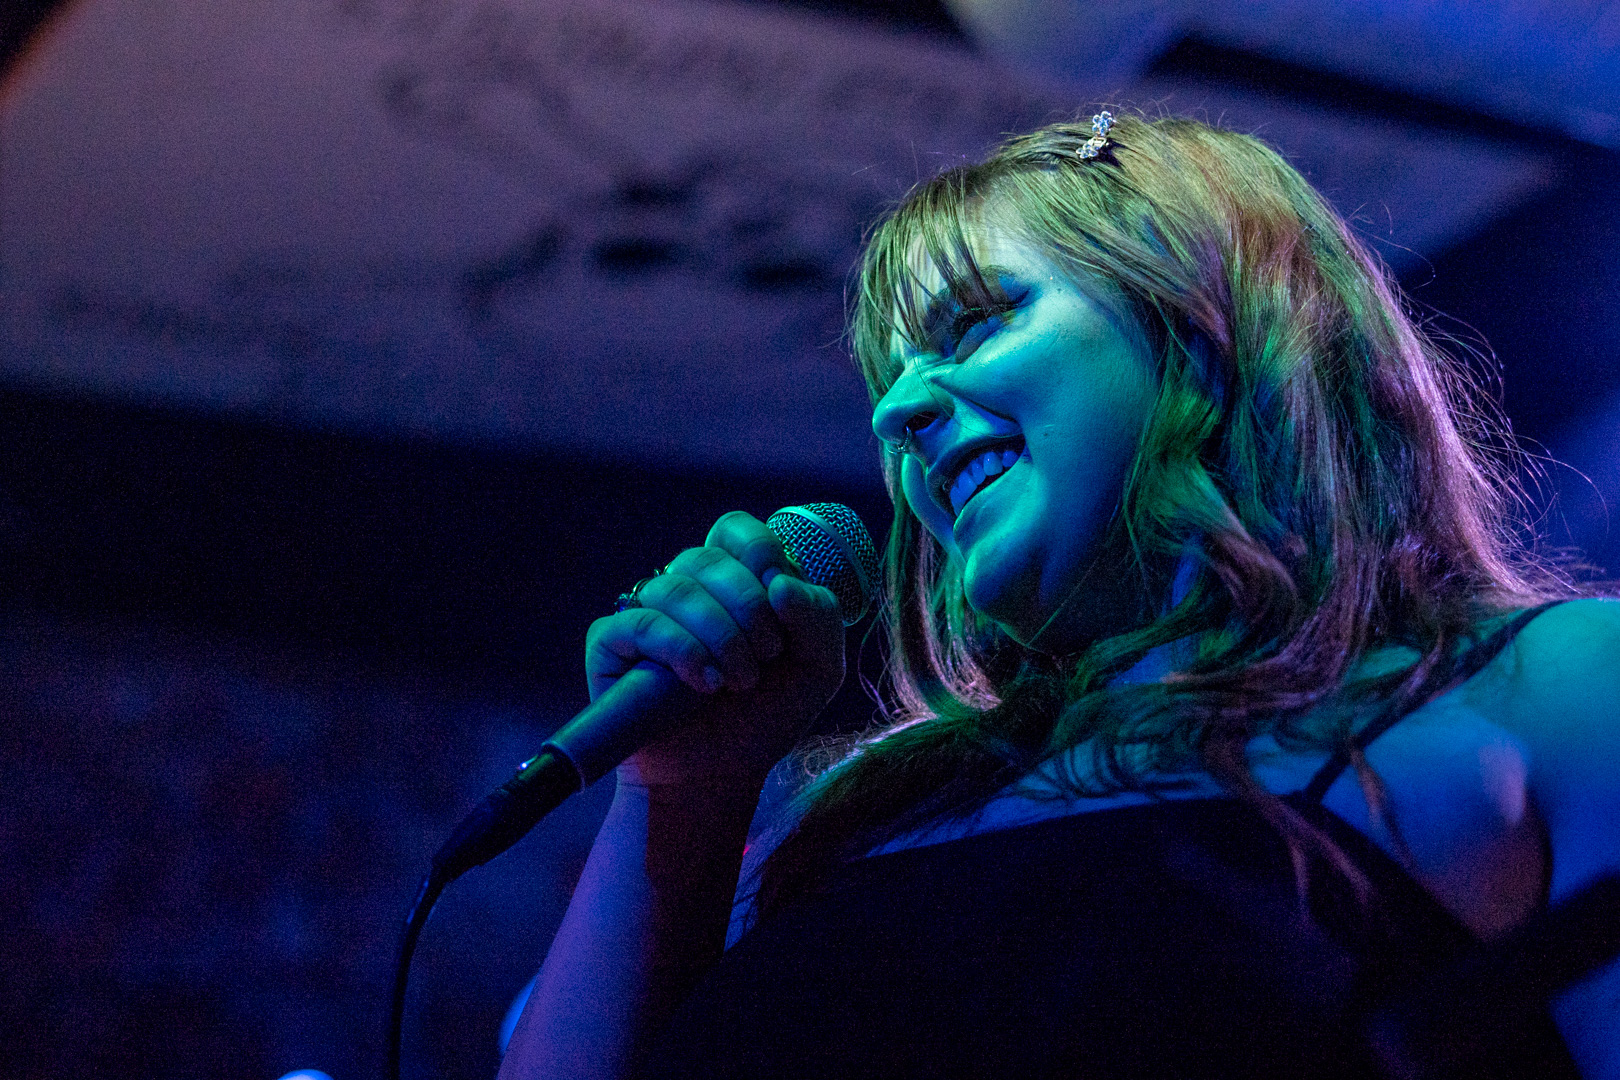 A young woman sings into a microphone while smiling